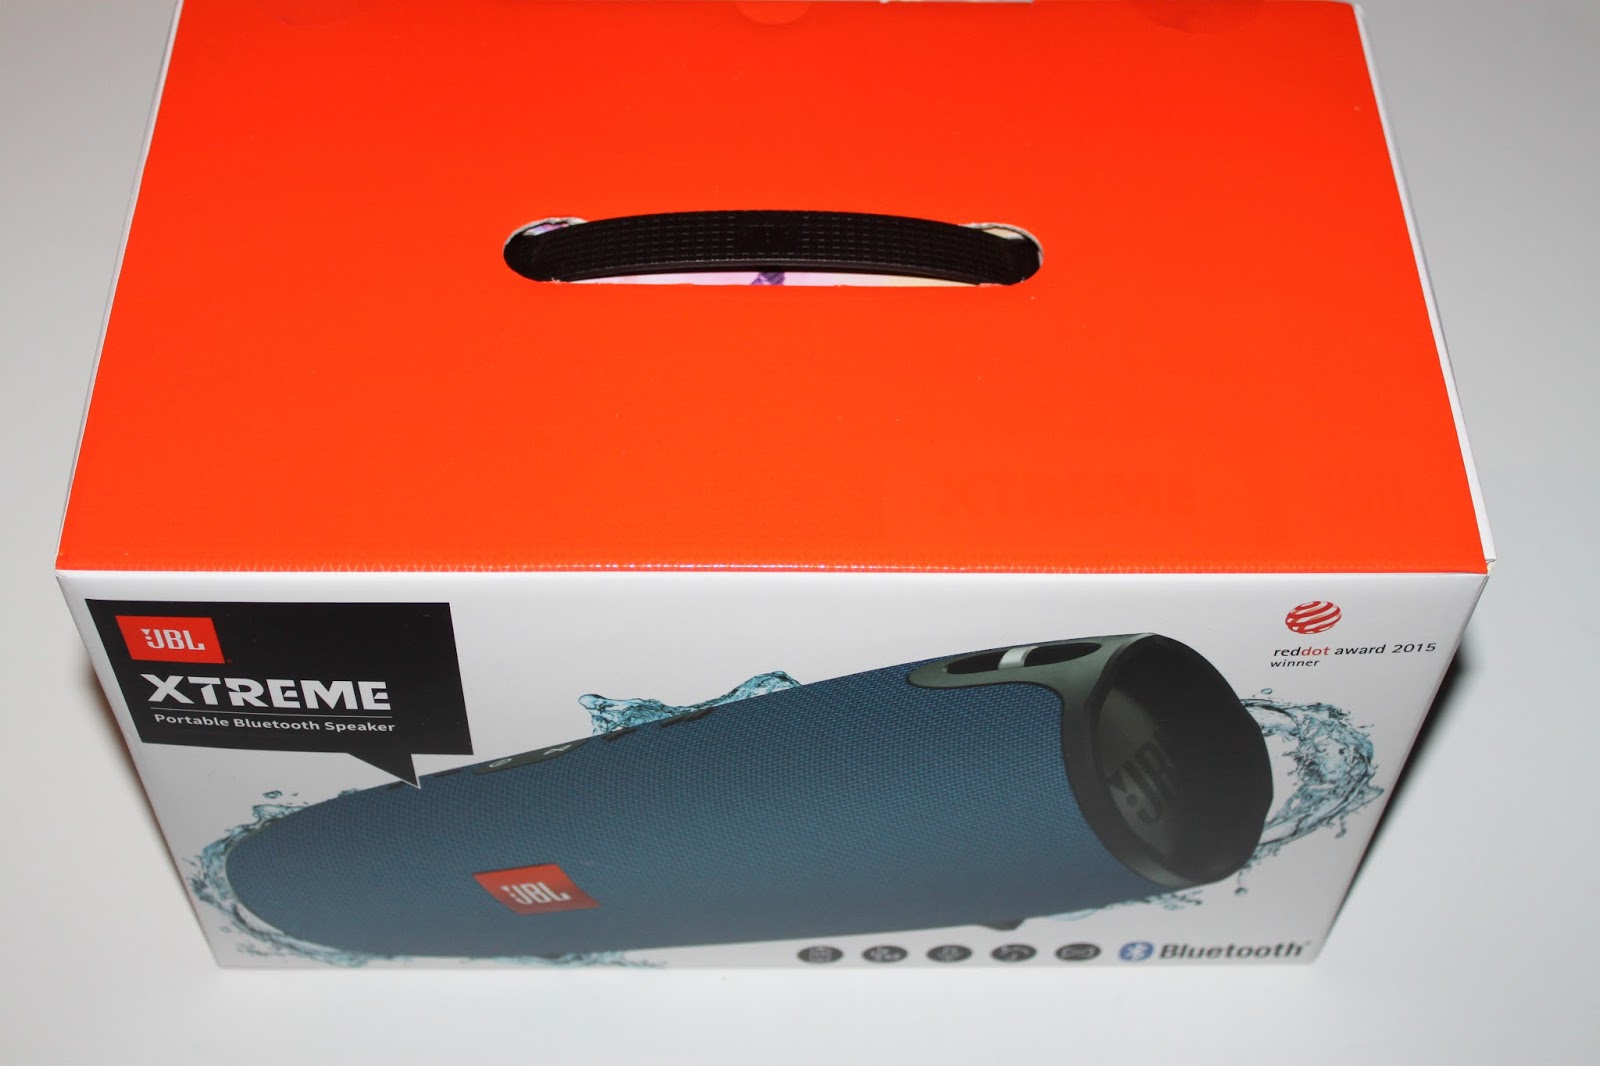 Stereowise Plus: JBL Xtreme Portable Bluetooth Speaker Review